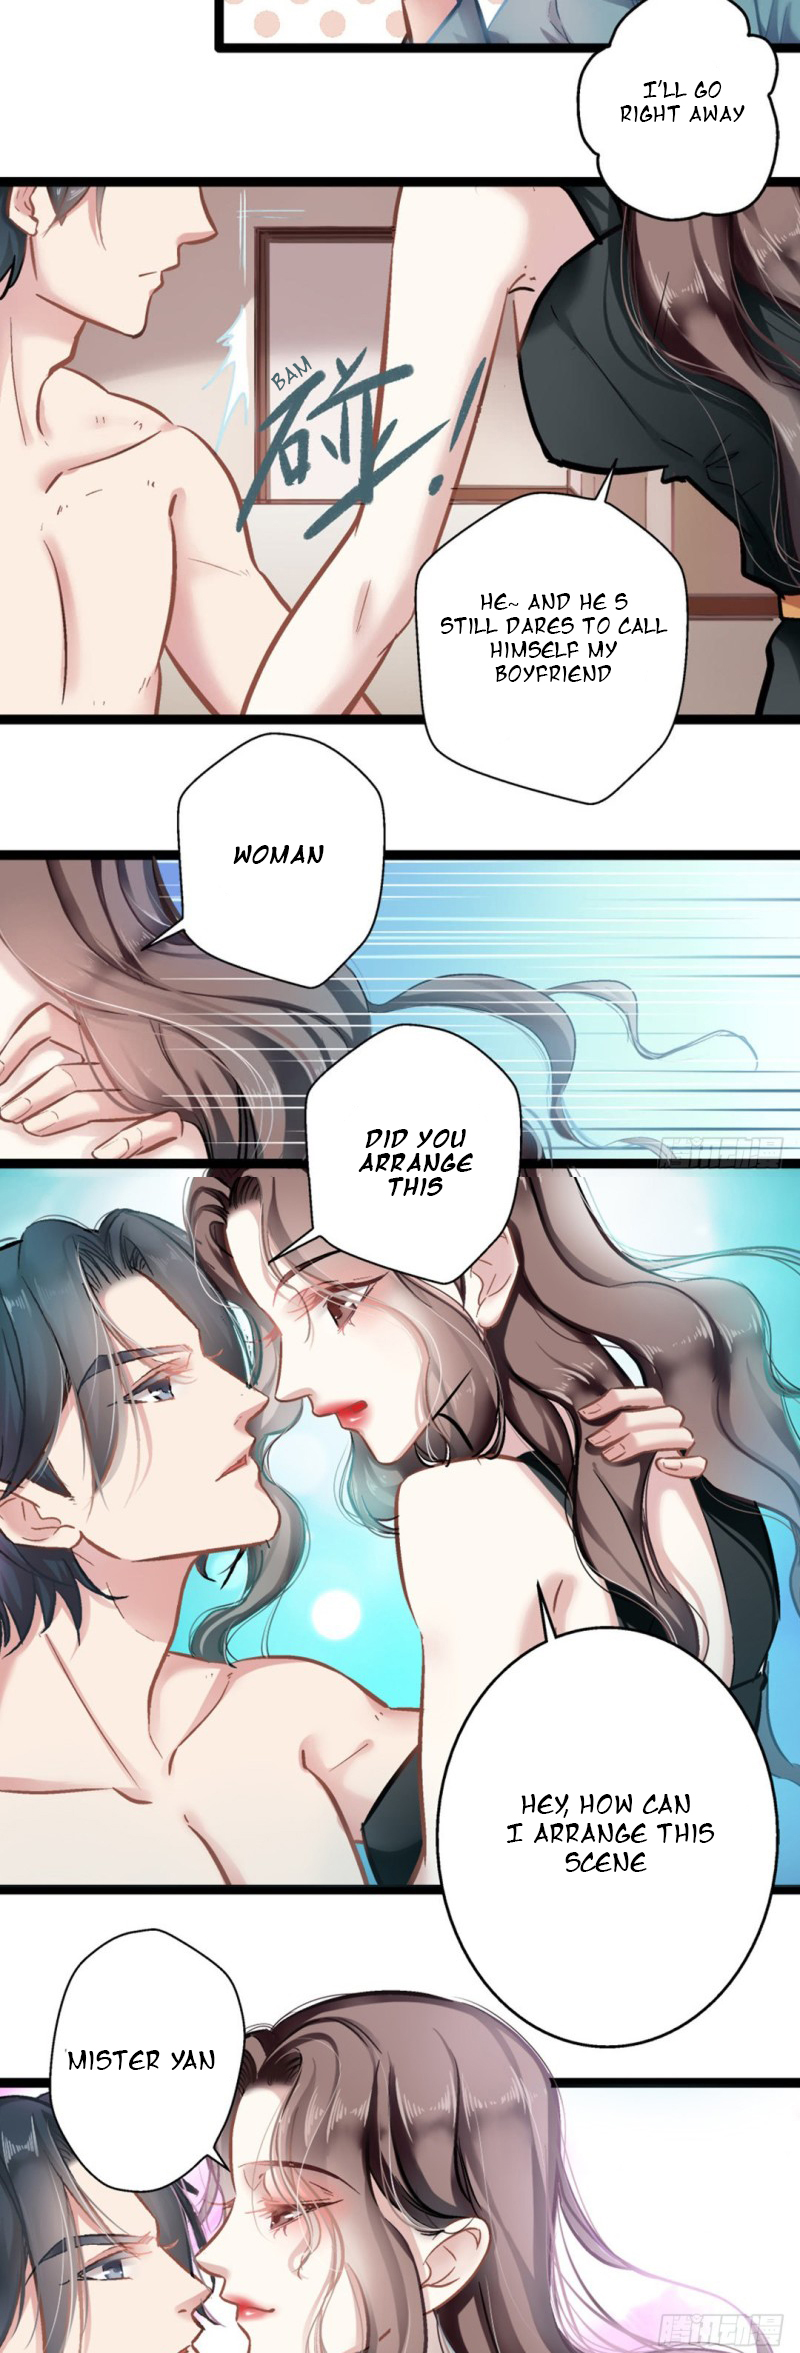 Lovable and Dark Wife Ch. 2